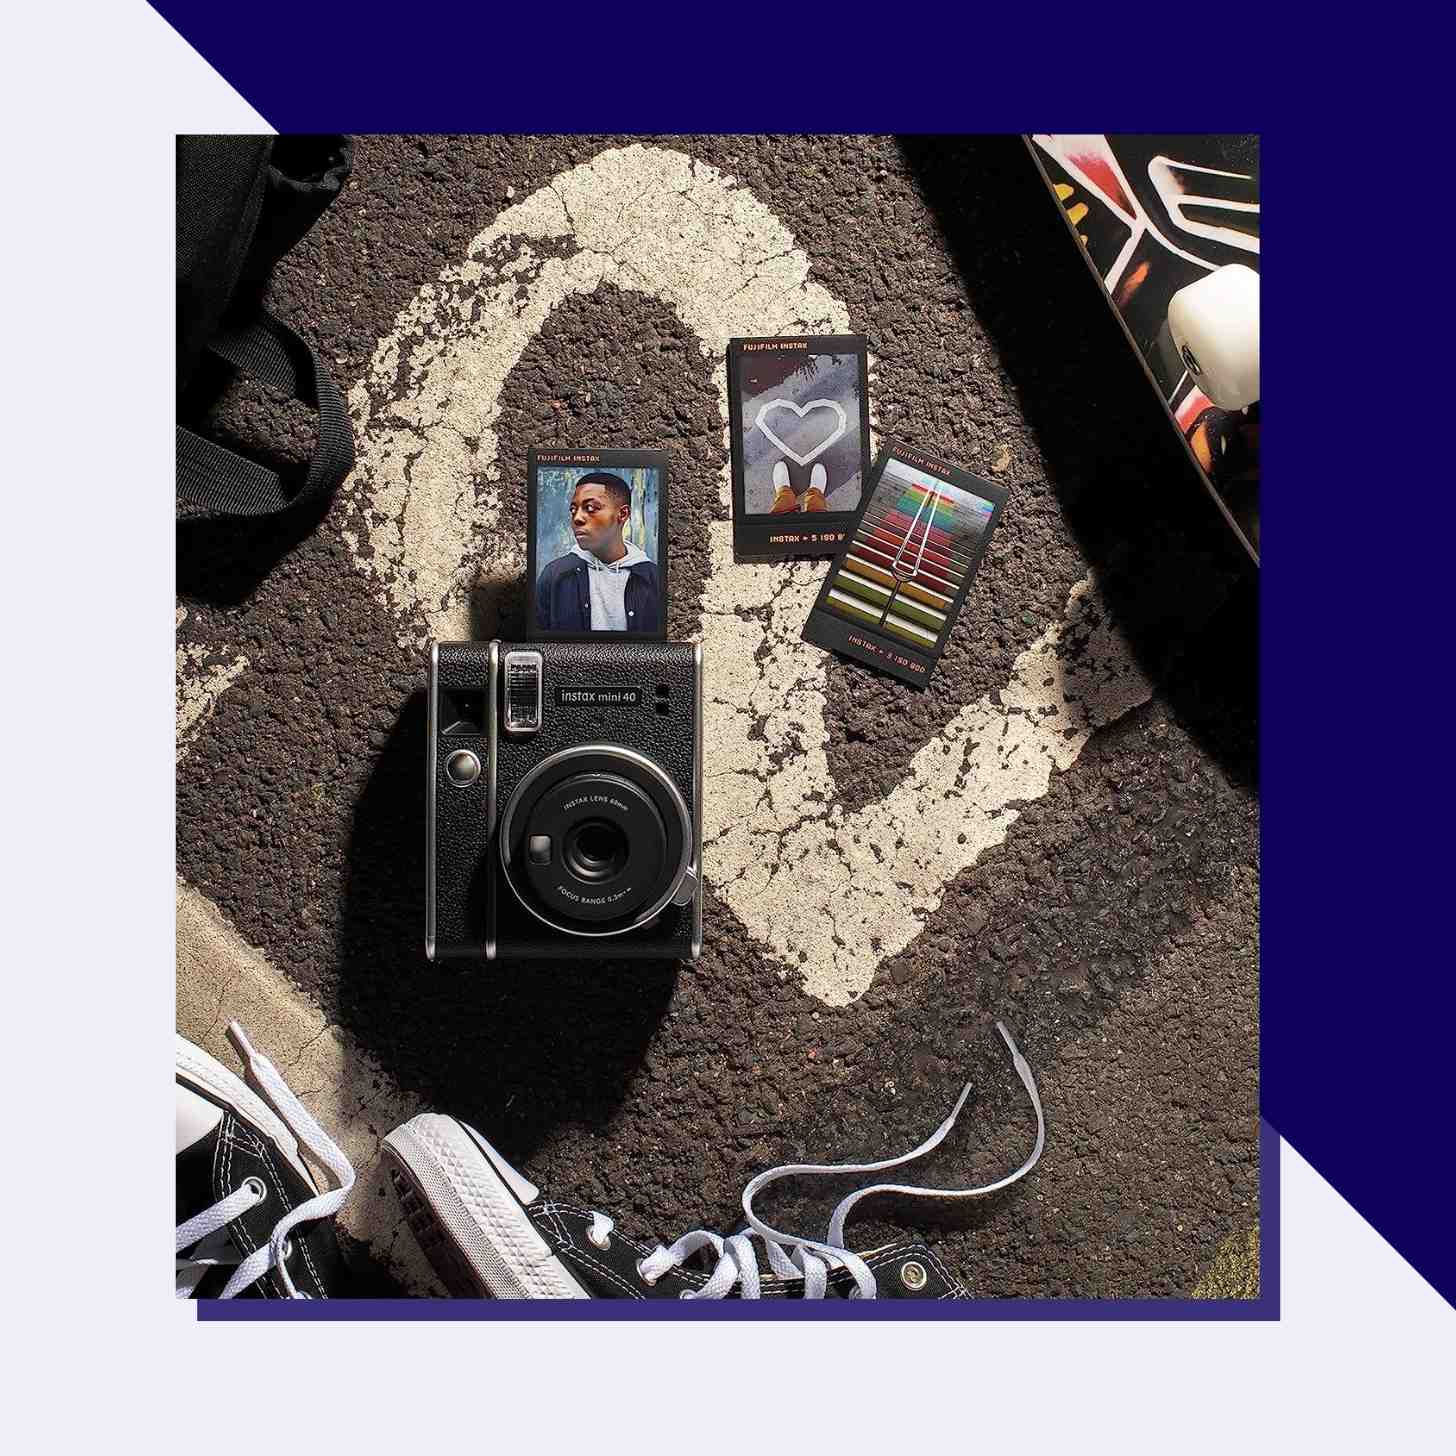 A Fujifilm Camera And Three Polaroid Pictures On the Asphalt